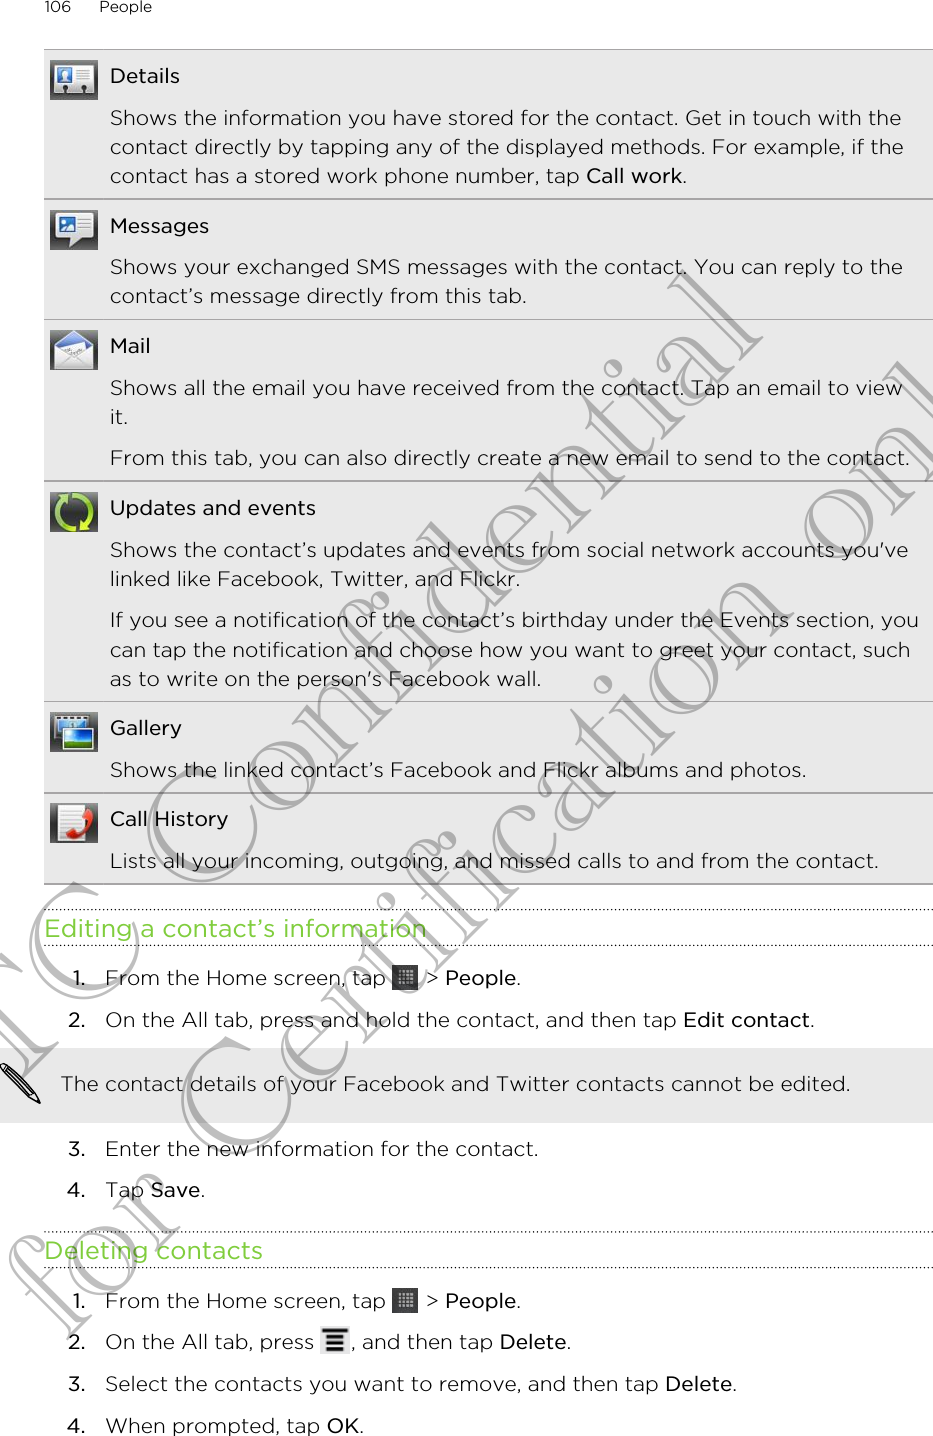 DetailsShows the information you have stored for the contact. Get in touch with thecontact directly by tapping any of the displayed methods. For example, if thecontact has a stored work phone number, tap Call work.MessagesShows your exchanged SMS messages with the contact. You can reply to thecontact’s message directly from this tab.MailShows all the email you have received from the contact. Tap an email to viewit.From this tab, you can also directly create a new email to send to the contact.Updates and eventsShows the contact’s updates and events from social network accounts you&apos;velinked like Facebook, Twitter, and Flickr.If you see a notification of the contact’s birthday under the Events section, youcan tap the notification and choose how you want to greet your contact, suchas to write on the person&apos;s Facebook wall.GalleryShows the linked contact’s Facebook and Flickr albums and photos.Call HistoryLists all your incoming, outgoing, and missed calls to and from the contact.Editing a contact’s information1. From the Home screen, tap   &gt; People.2. On the All tab, press and hold the contact, and then tap Edit contact. The contact details of your Facebook and Twitter contacts cannot be edited.3. Enter the new information for the contact.4. Tap Save.Deleting contacts1. From the Home screen, tap   &gt; People.2. On the All tab, press  , and then tap Delete.3. Select the contacts you want to remove, and then tap Delete.4. When prompted, tap OK.106 PeopleHTC Confidential for Certification only